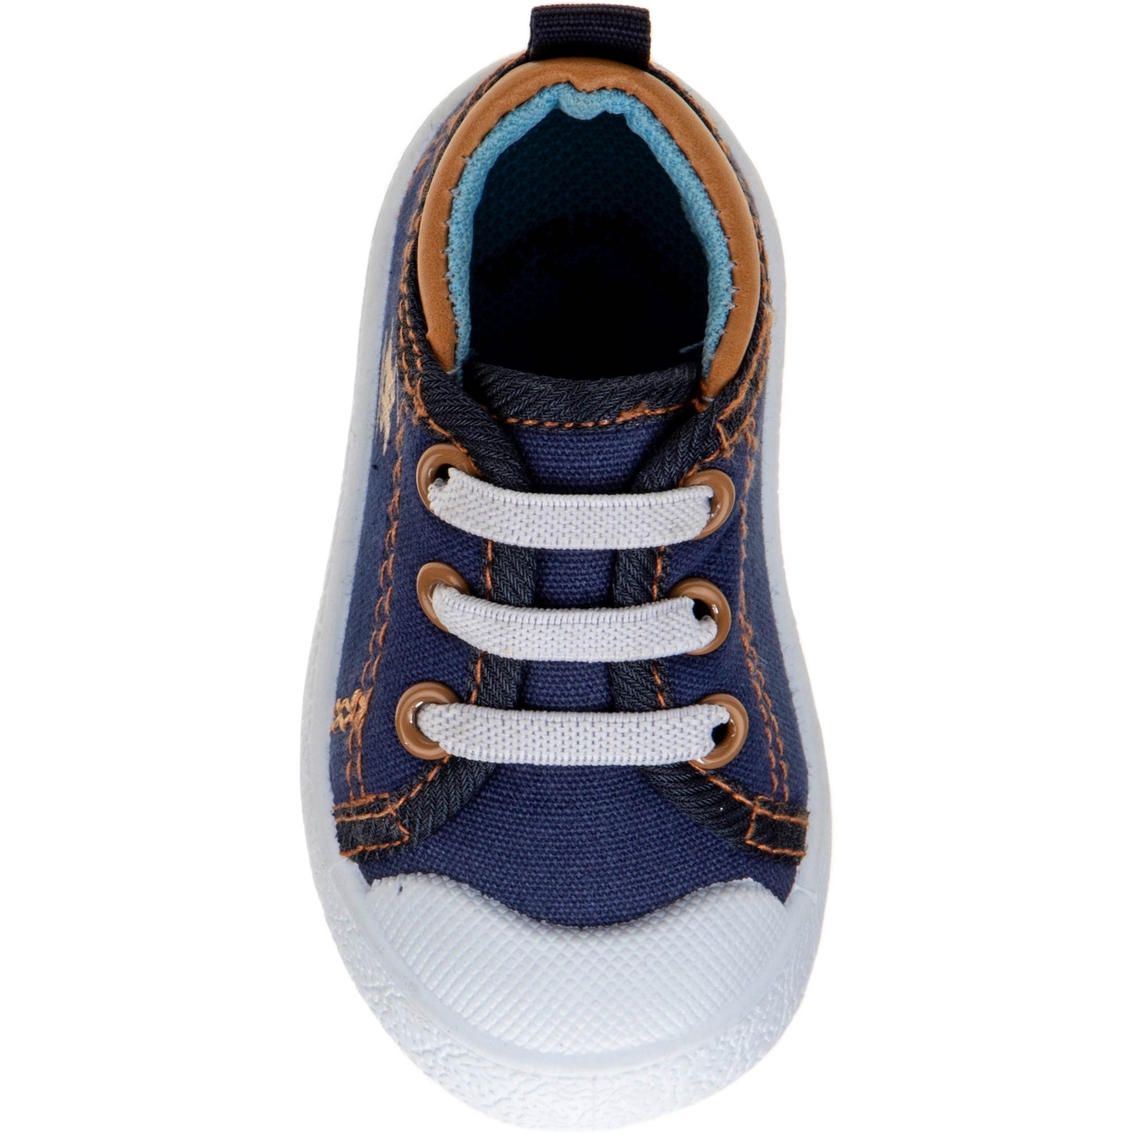 Beverly Hills Polo Club Infant Boys Canvas Sneakers - Image 5 of 6